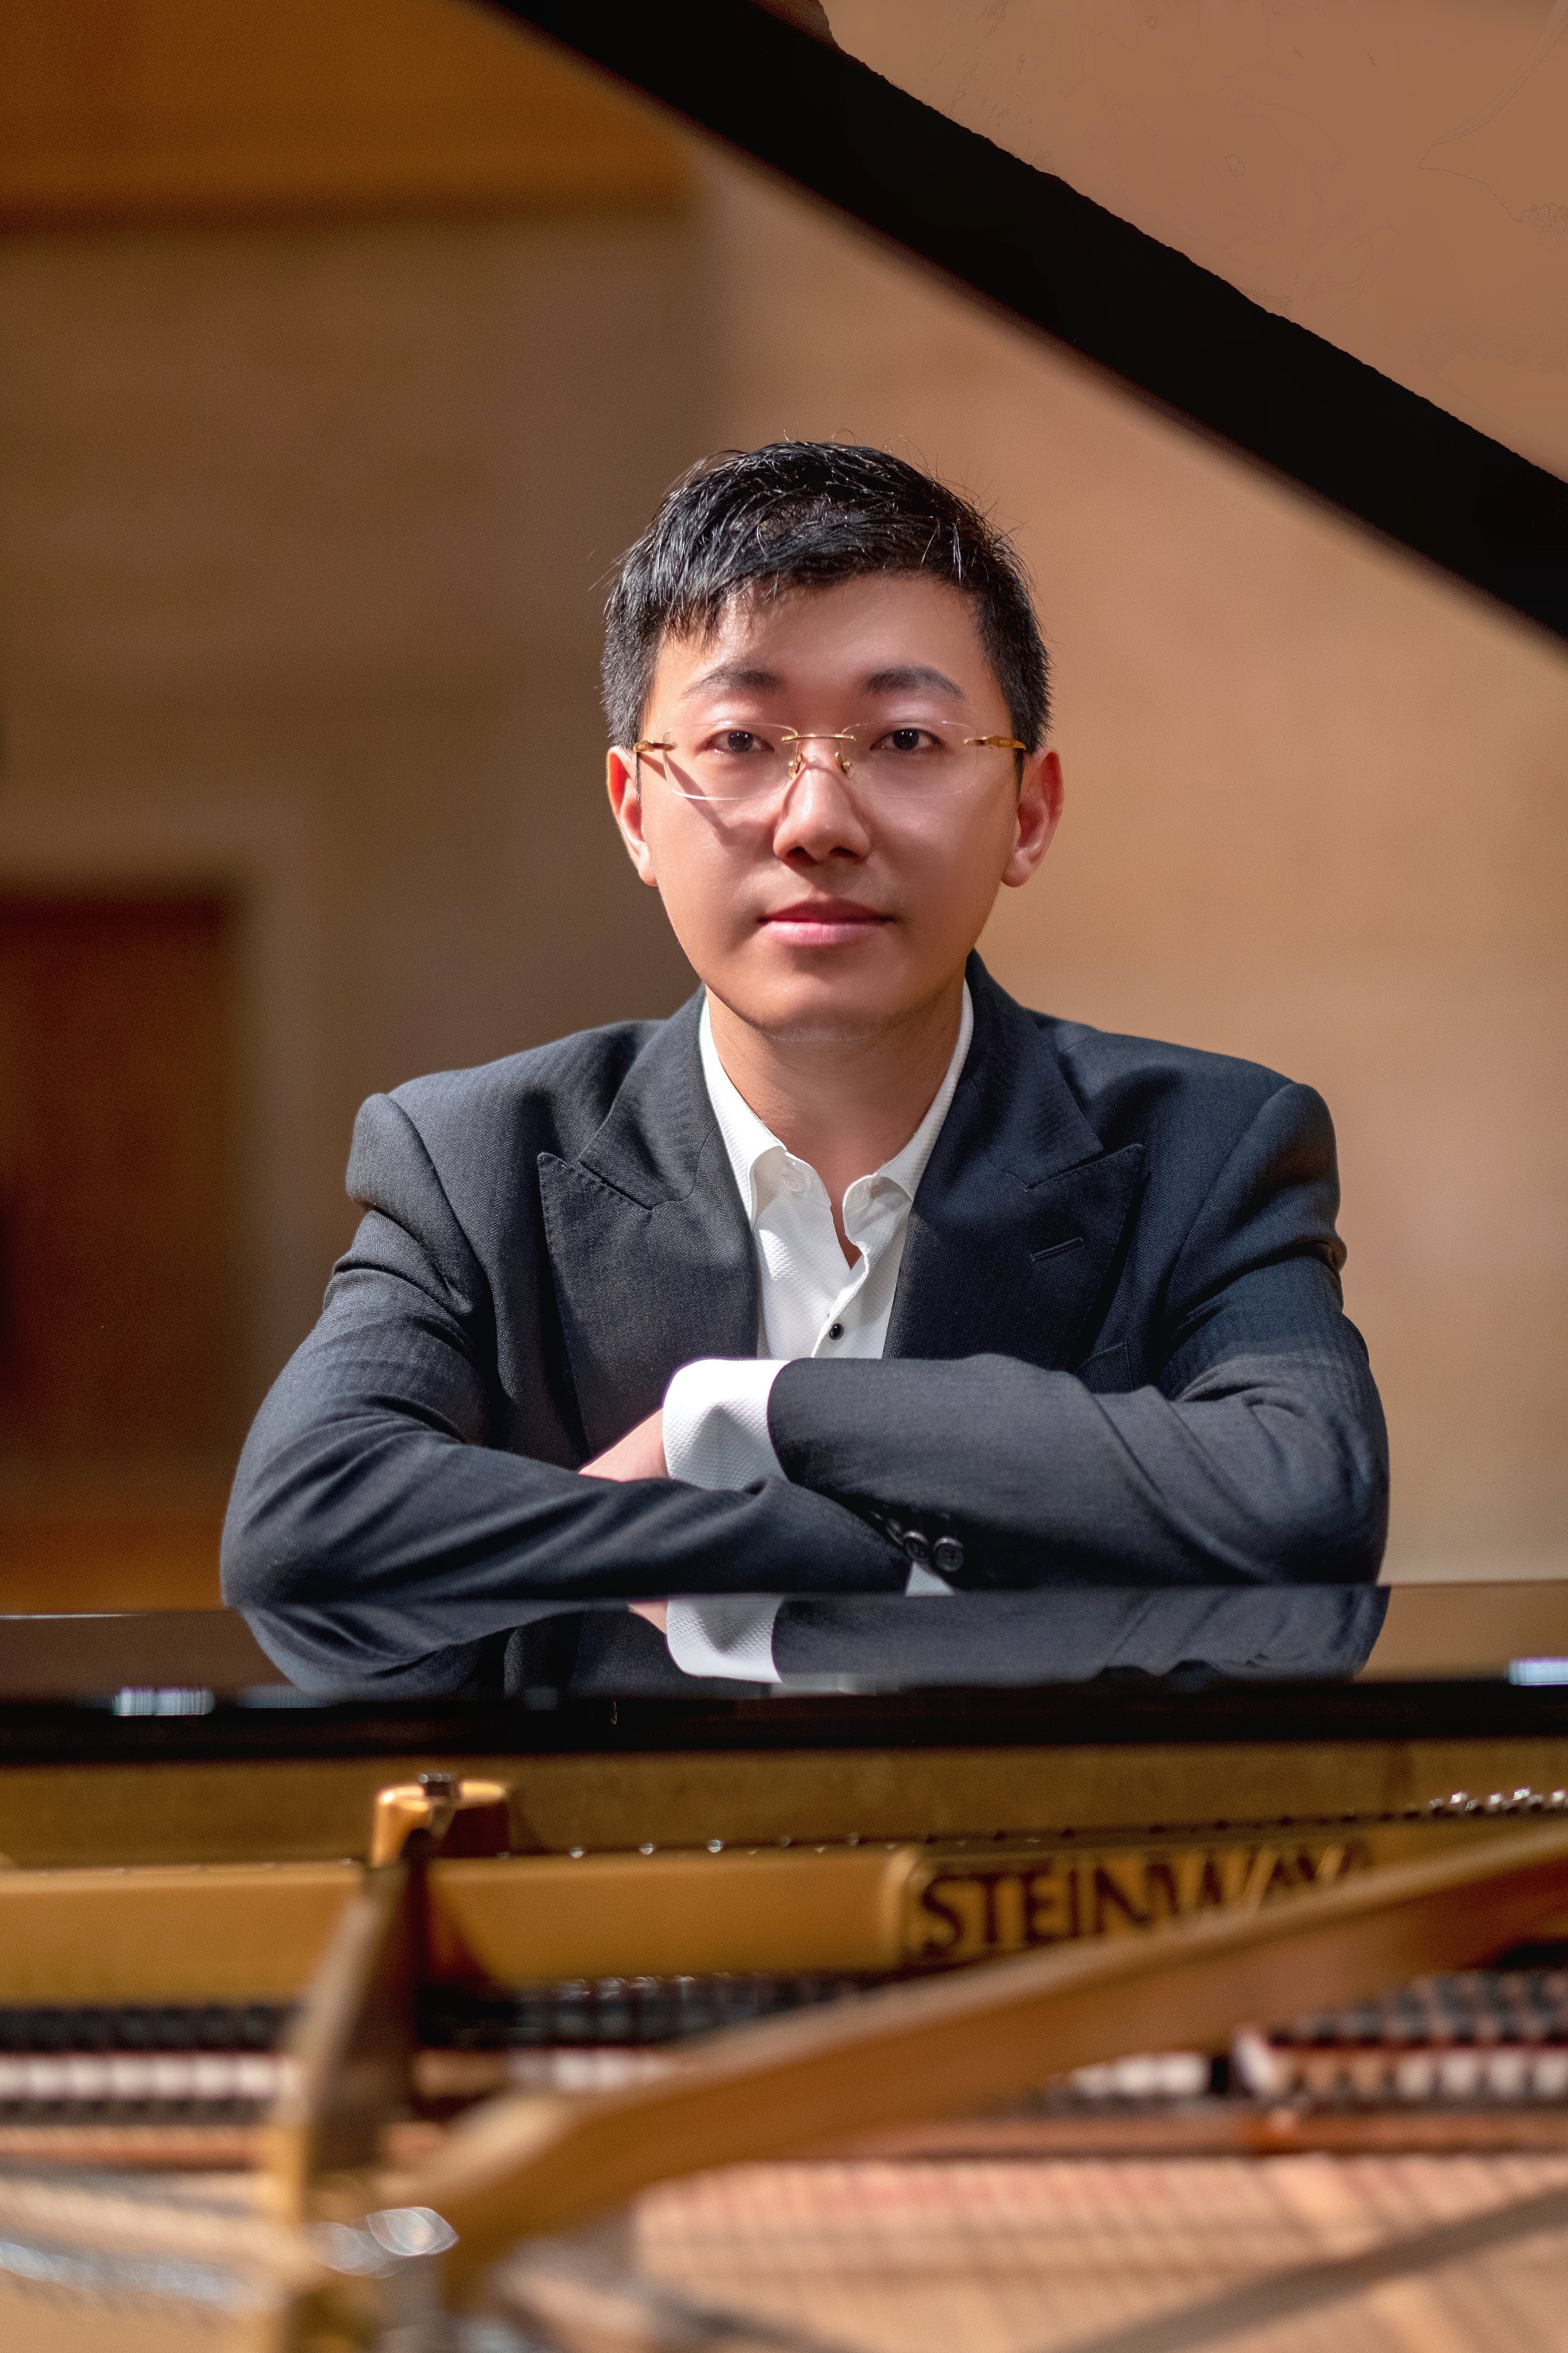 14th Arthur Rubinstein International Piano Master Competition in Review